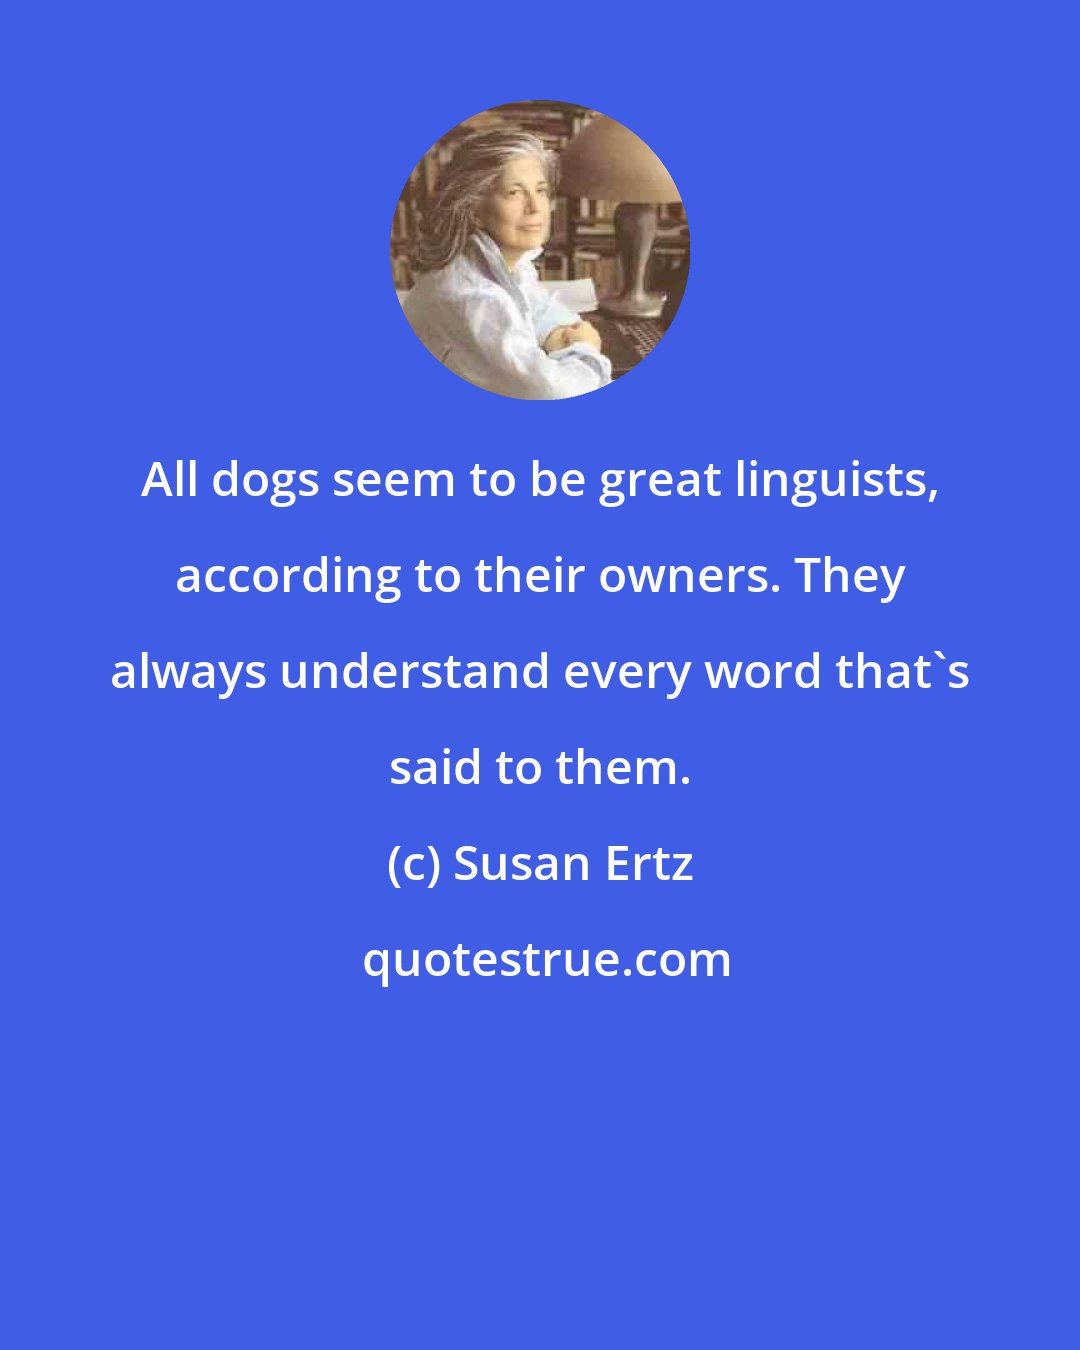 Susan Ertz: All dogs seem to be great linguists, according to their owners. They always understand every word that's said to them.